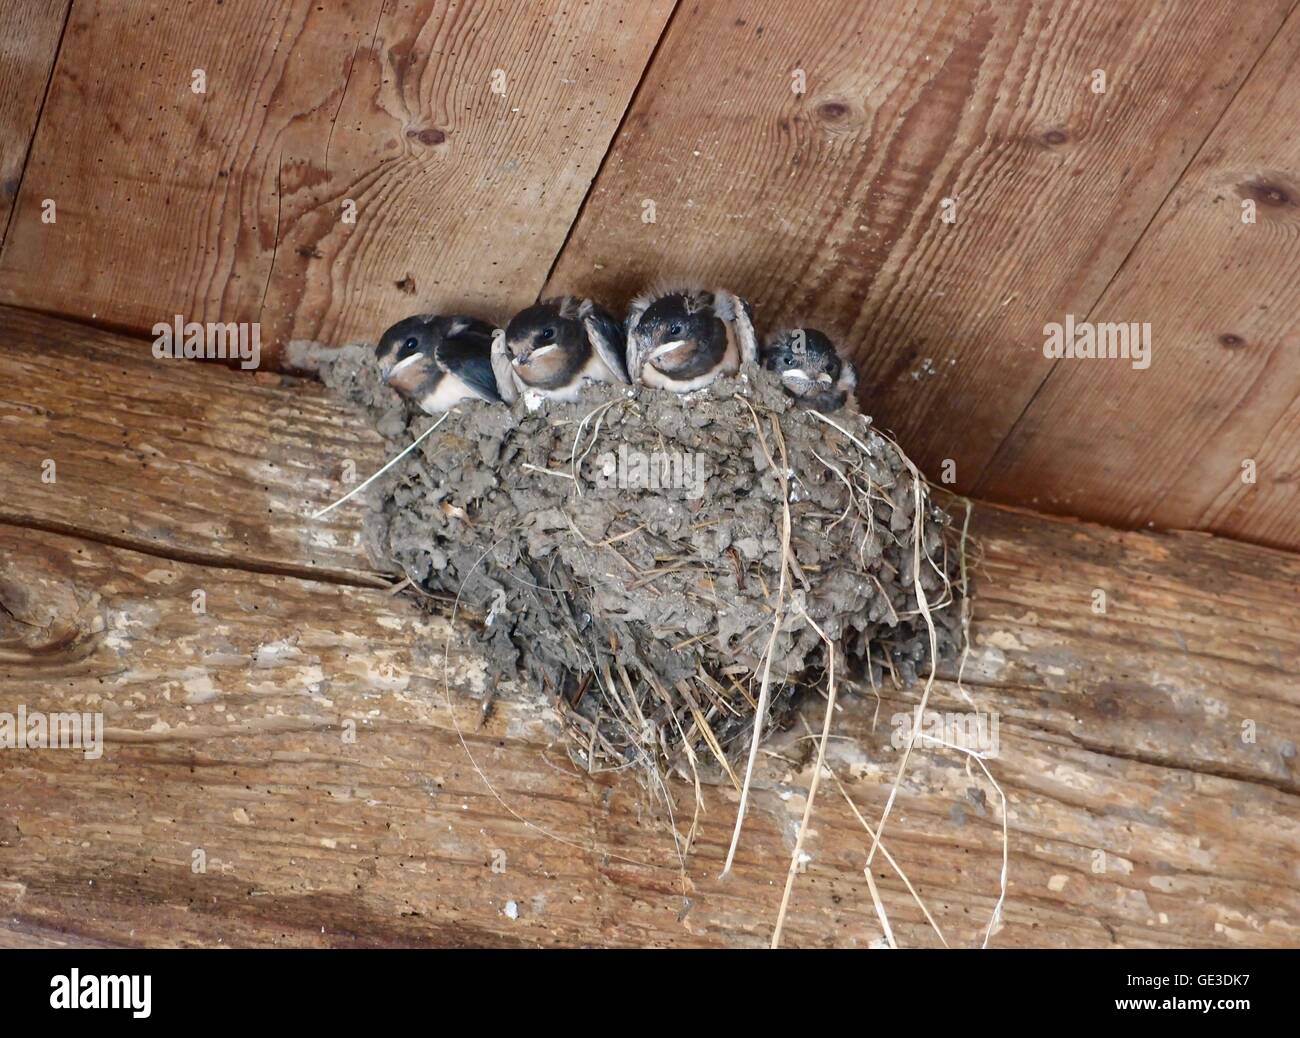 Four Swallow chicks in their nest, on a wooden wall, directly beneath a wooden ceiling. Stock Photo